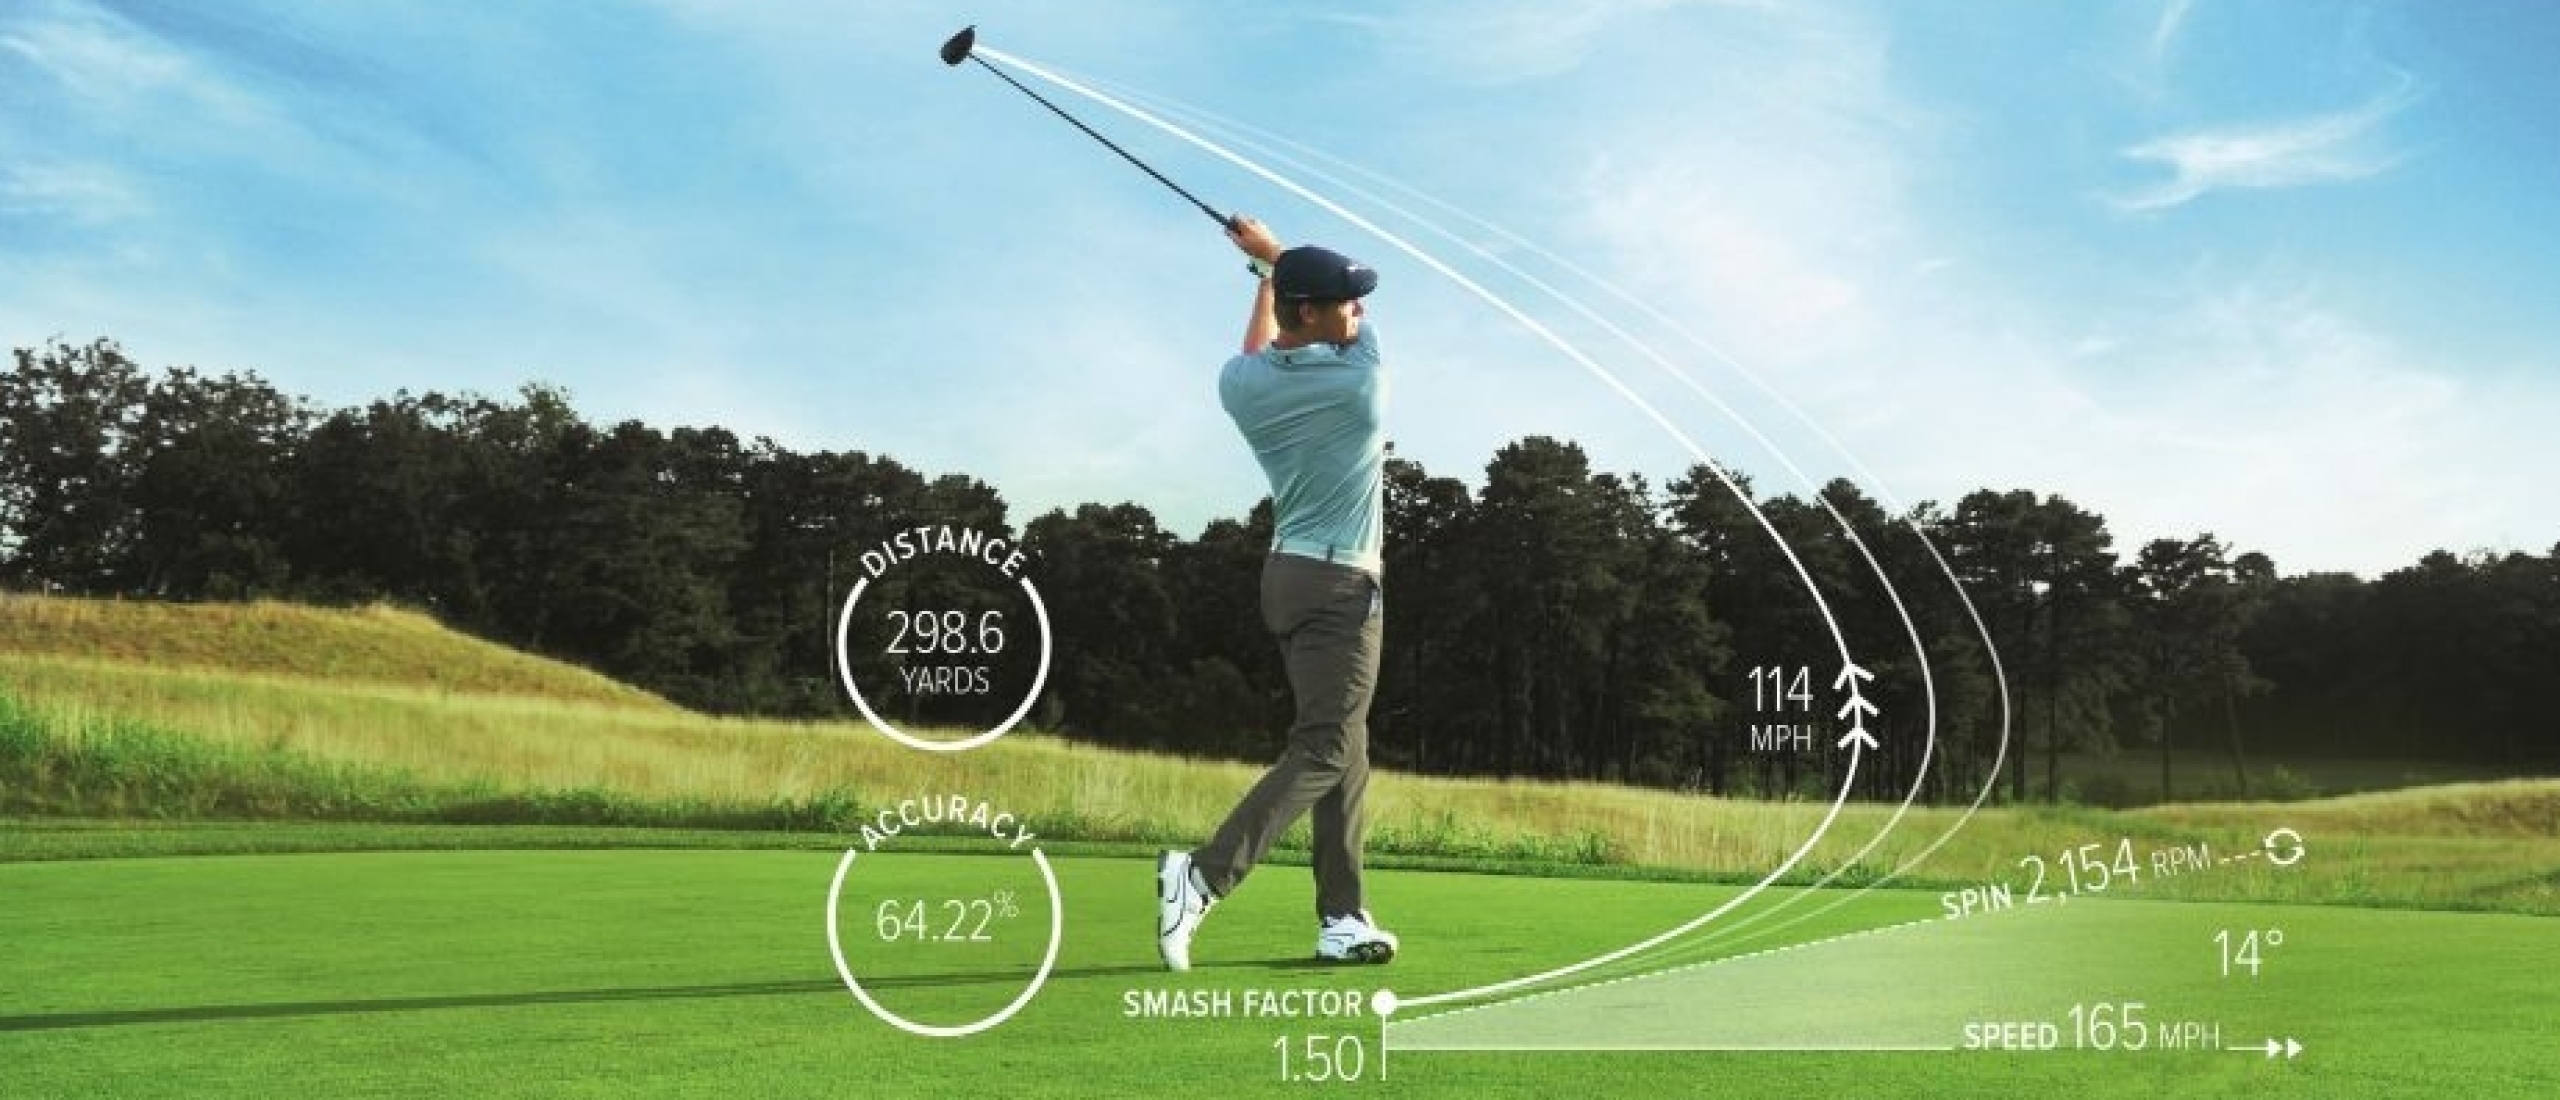 Are You Ready for High Tech Golf